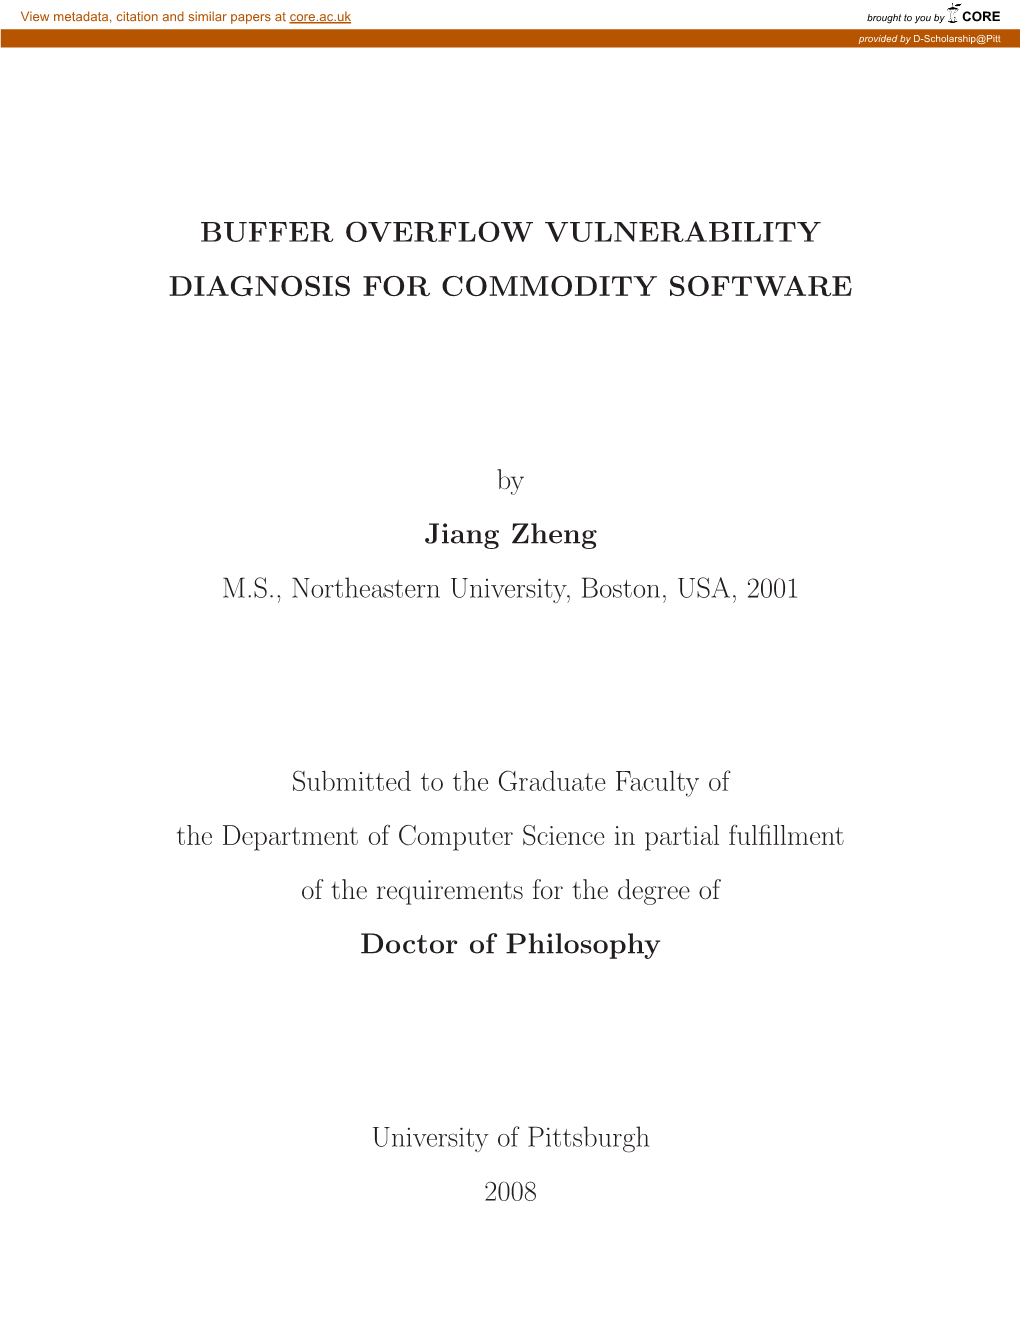 Buffer Overflow Vulnerability Diagnosis for Commodity Software